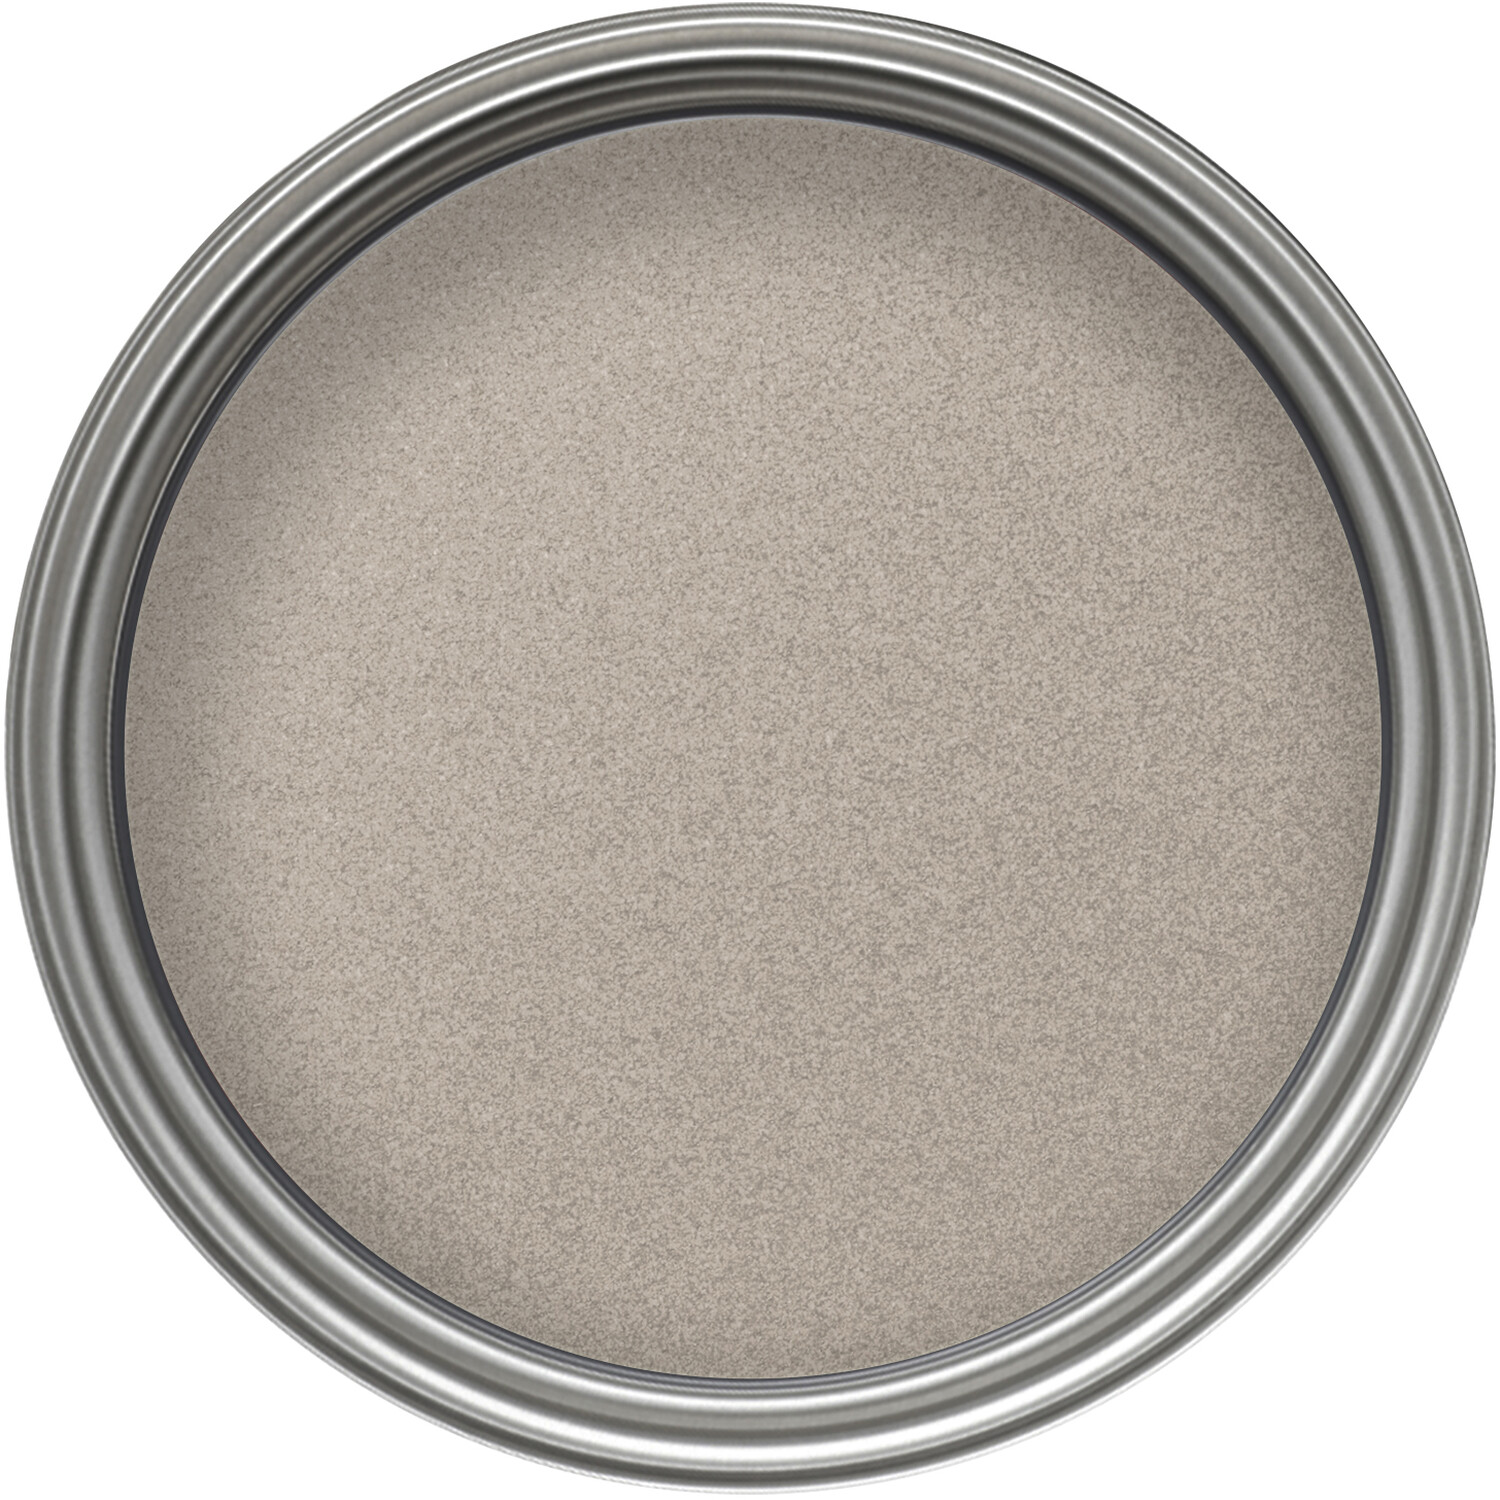 Crown Crafted Walls Wood and Metal Entice Lustrous Metallic Shimmer Emulsion Paint 1.25L Image 3